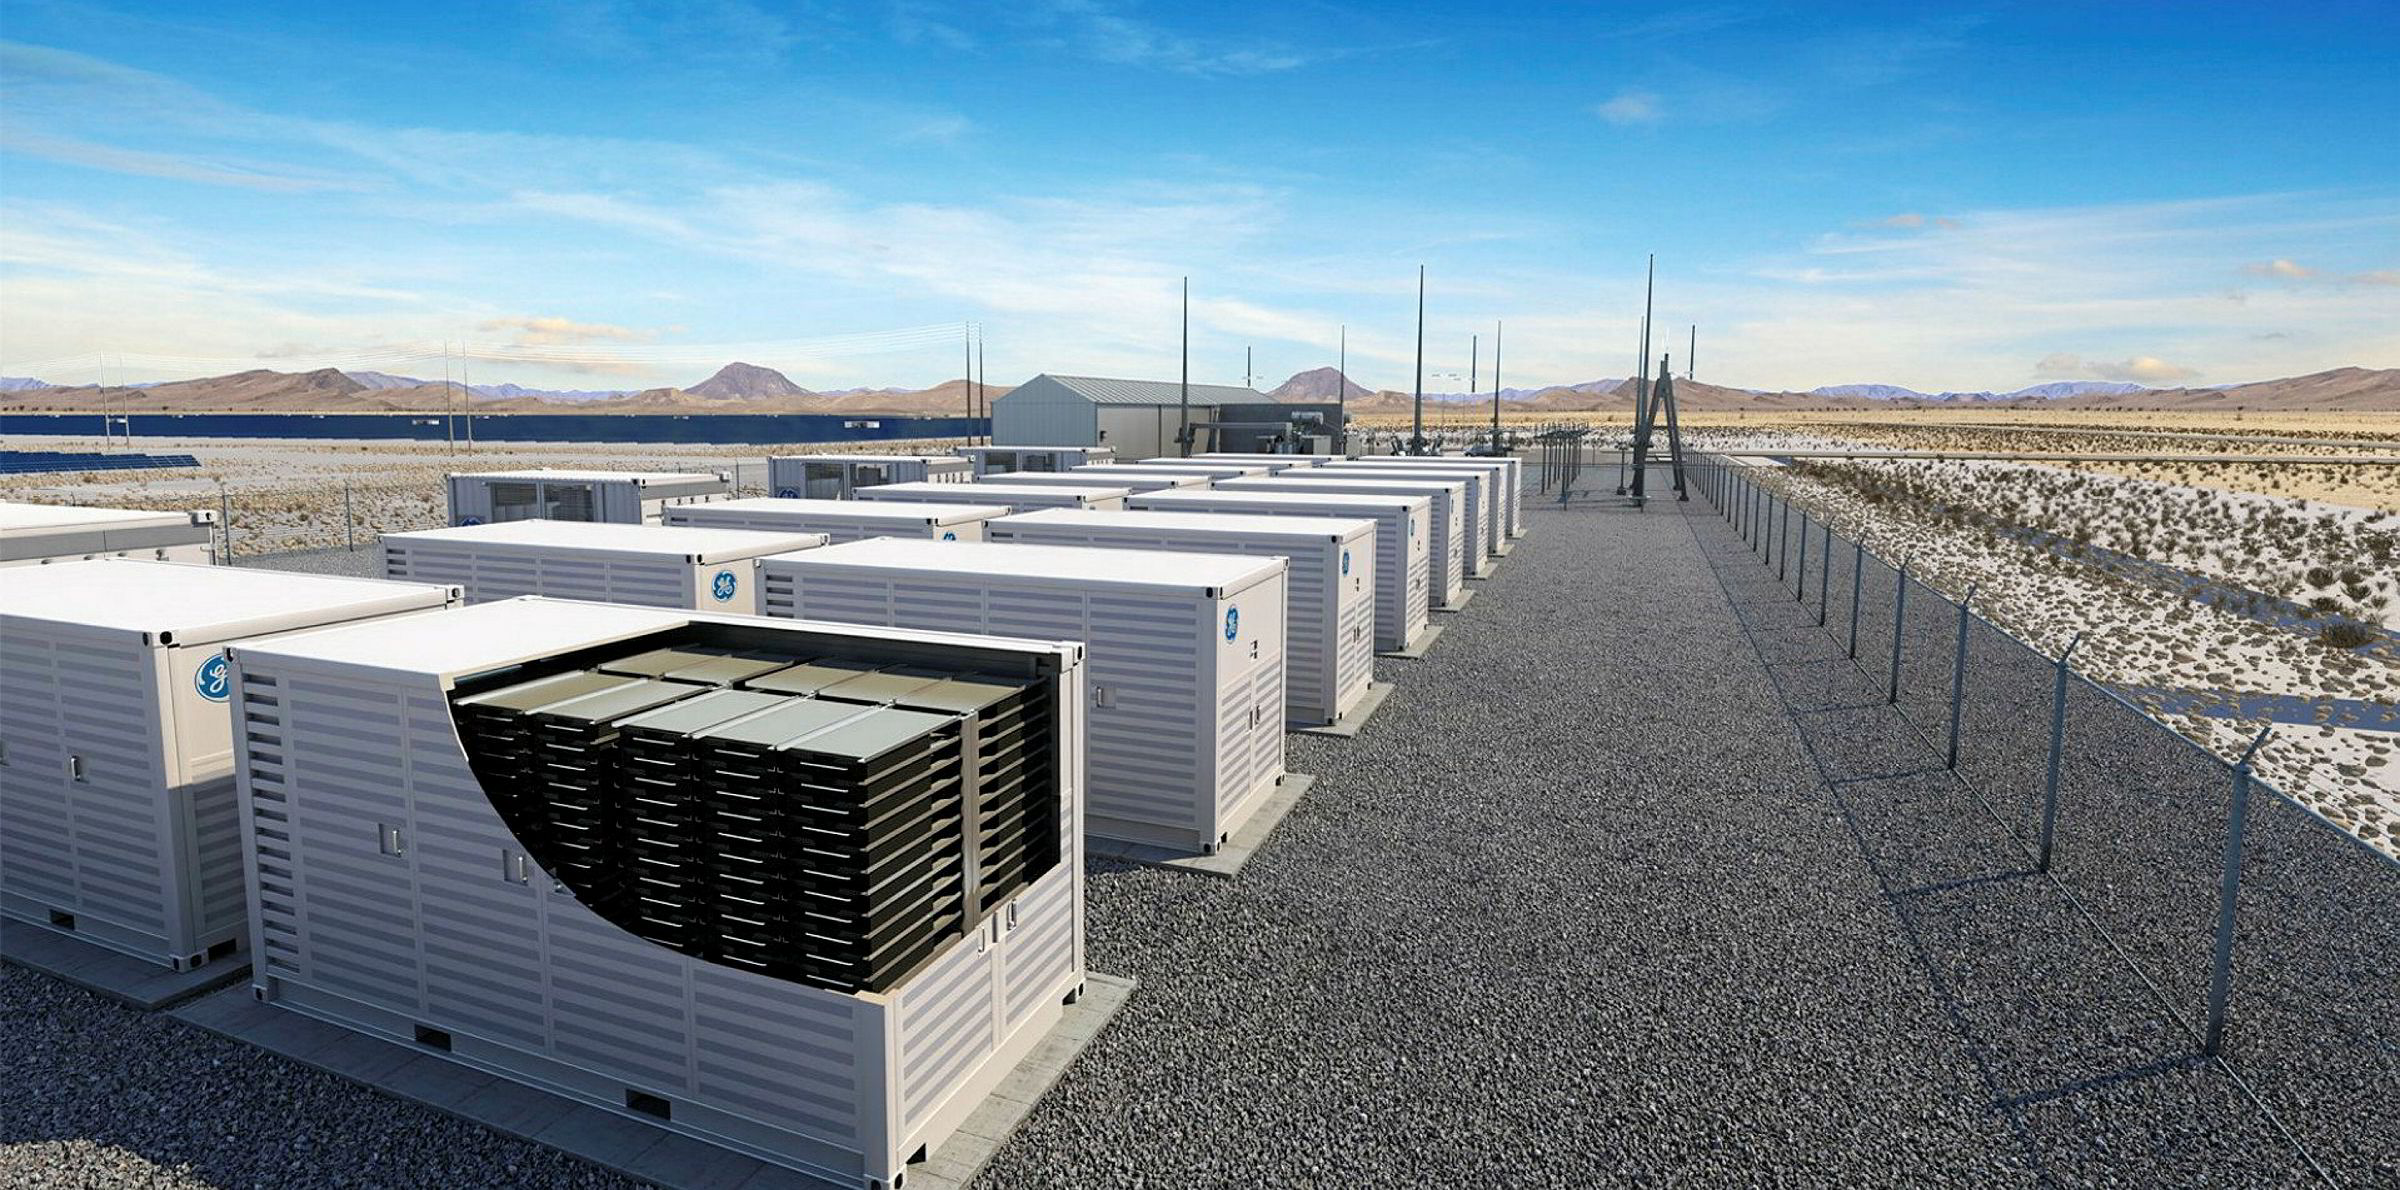 GE seals its largest US battery energy storage system order | Recharge